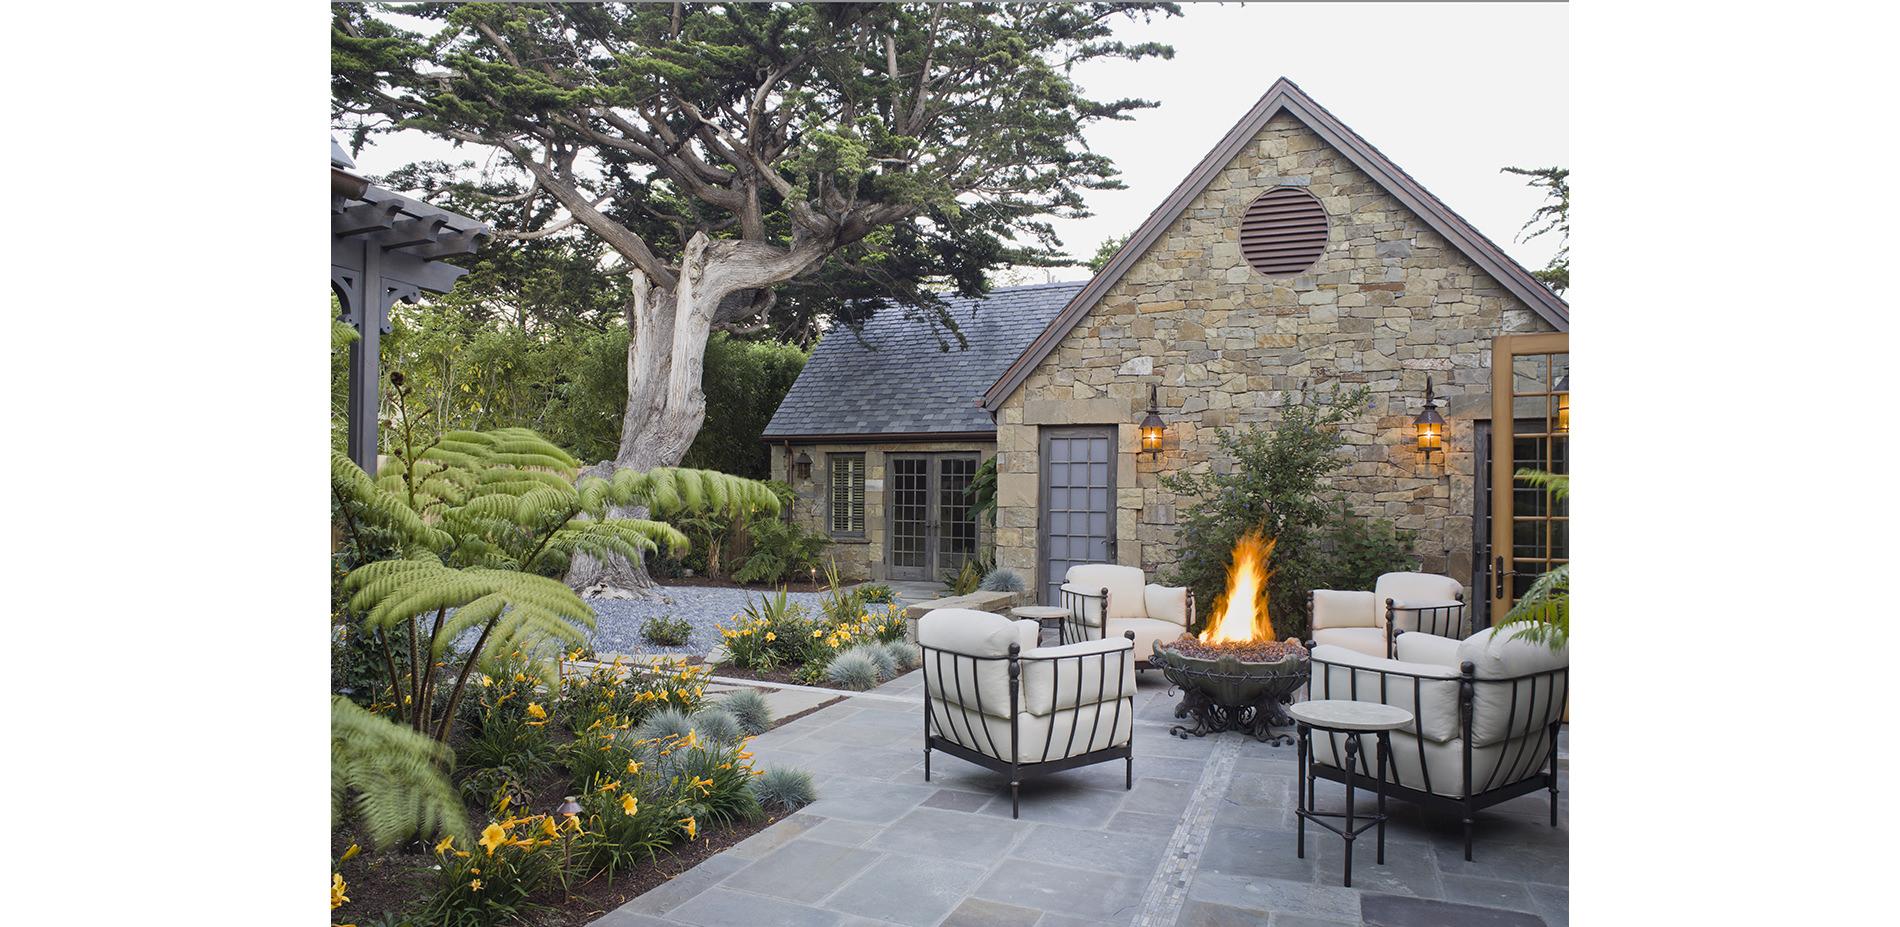 Building Exterior and Monterey Cypress